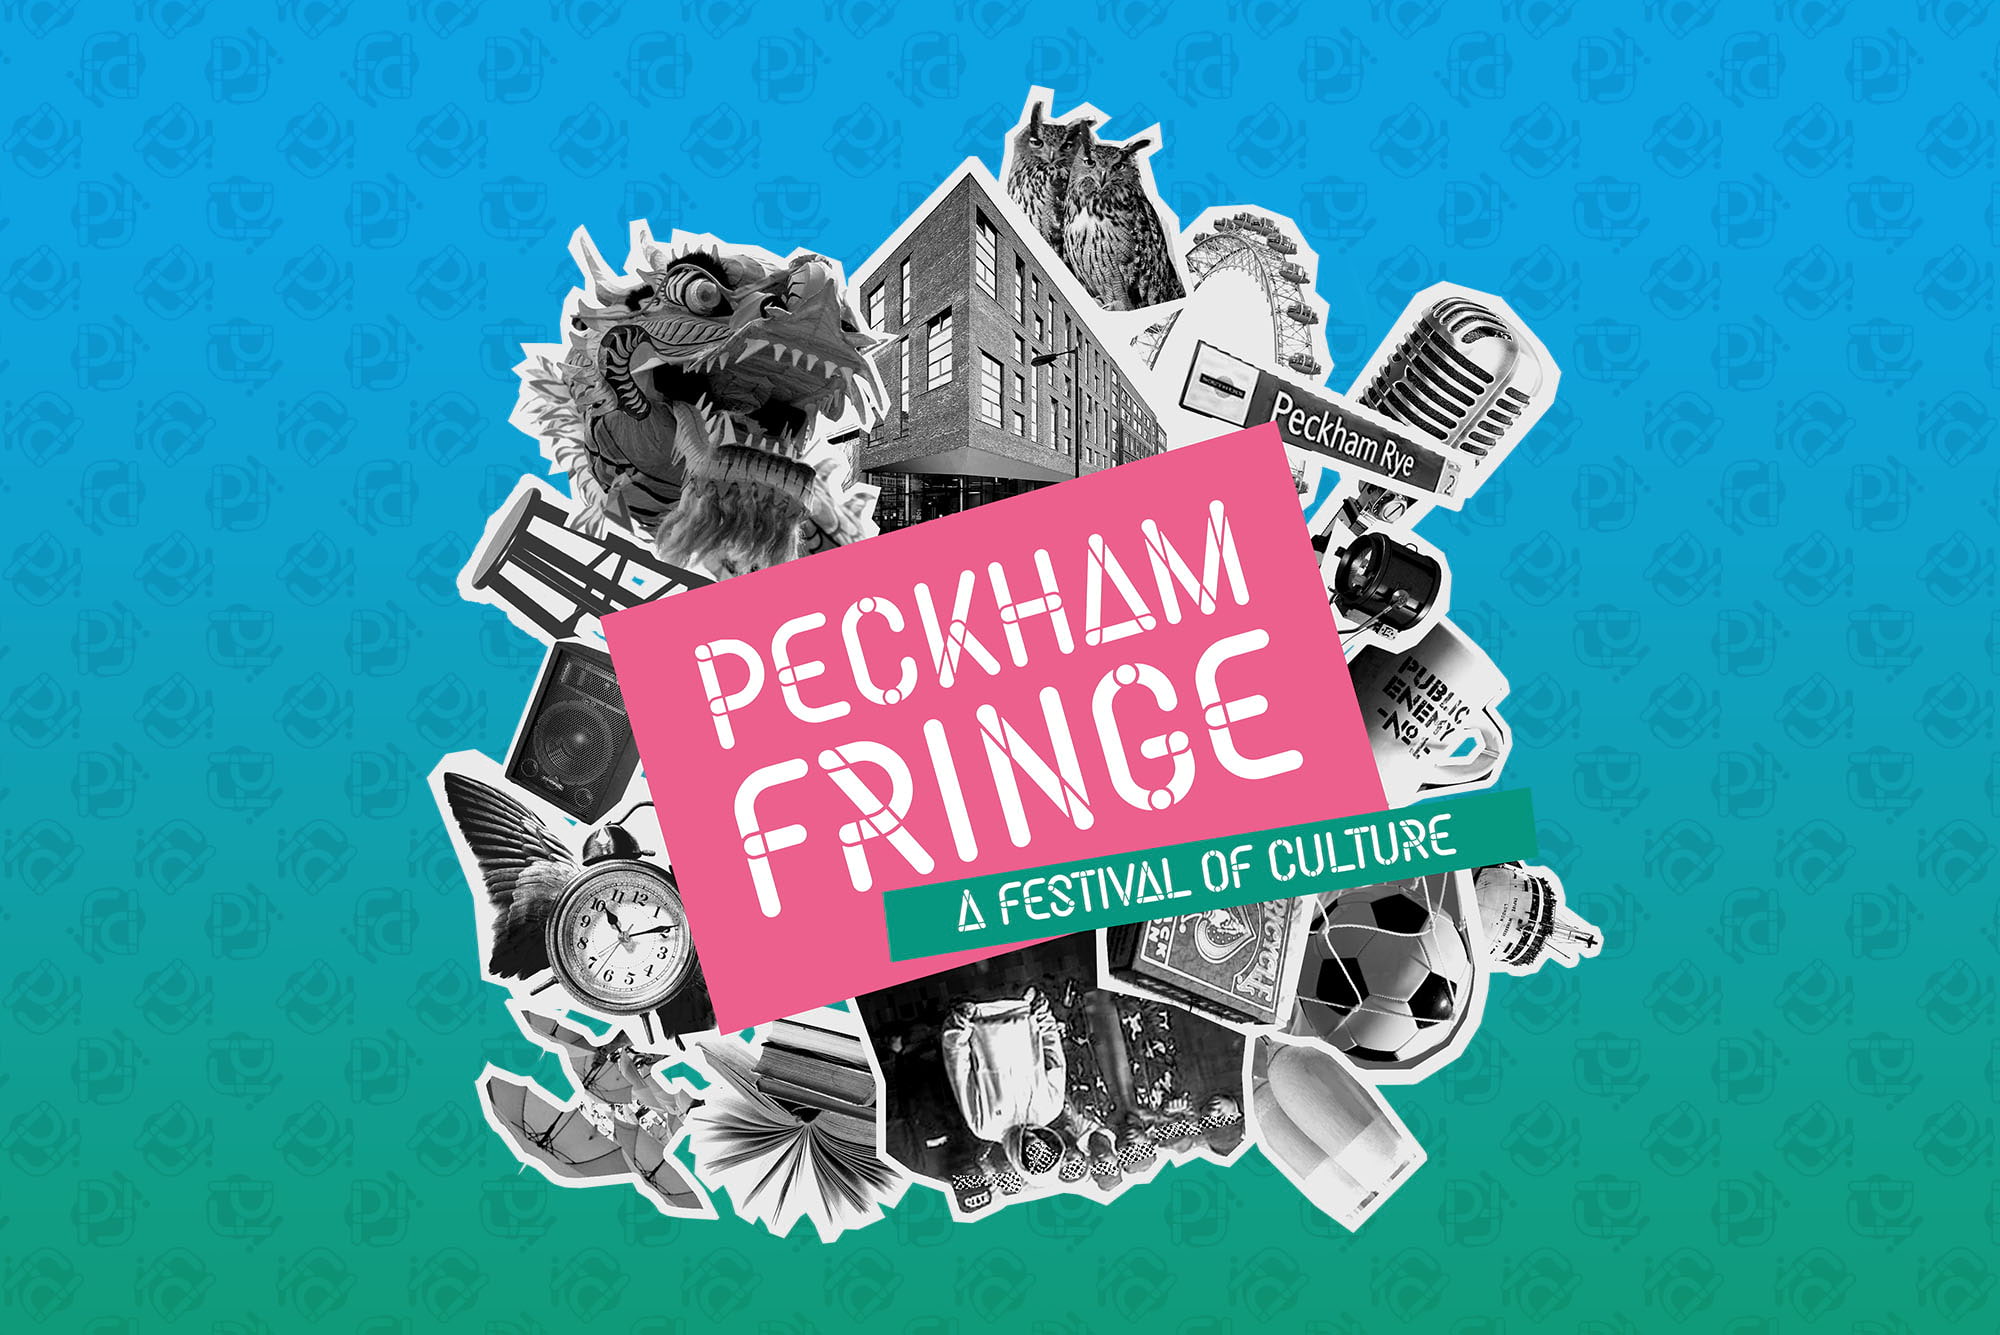 Peckham Fringe brings exciting new theatre to South London